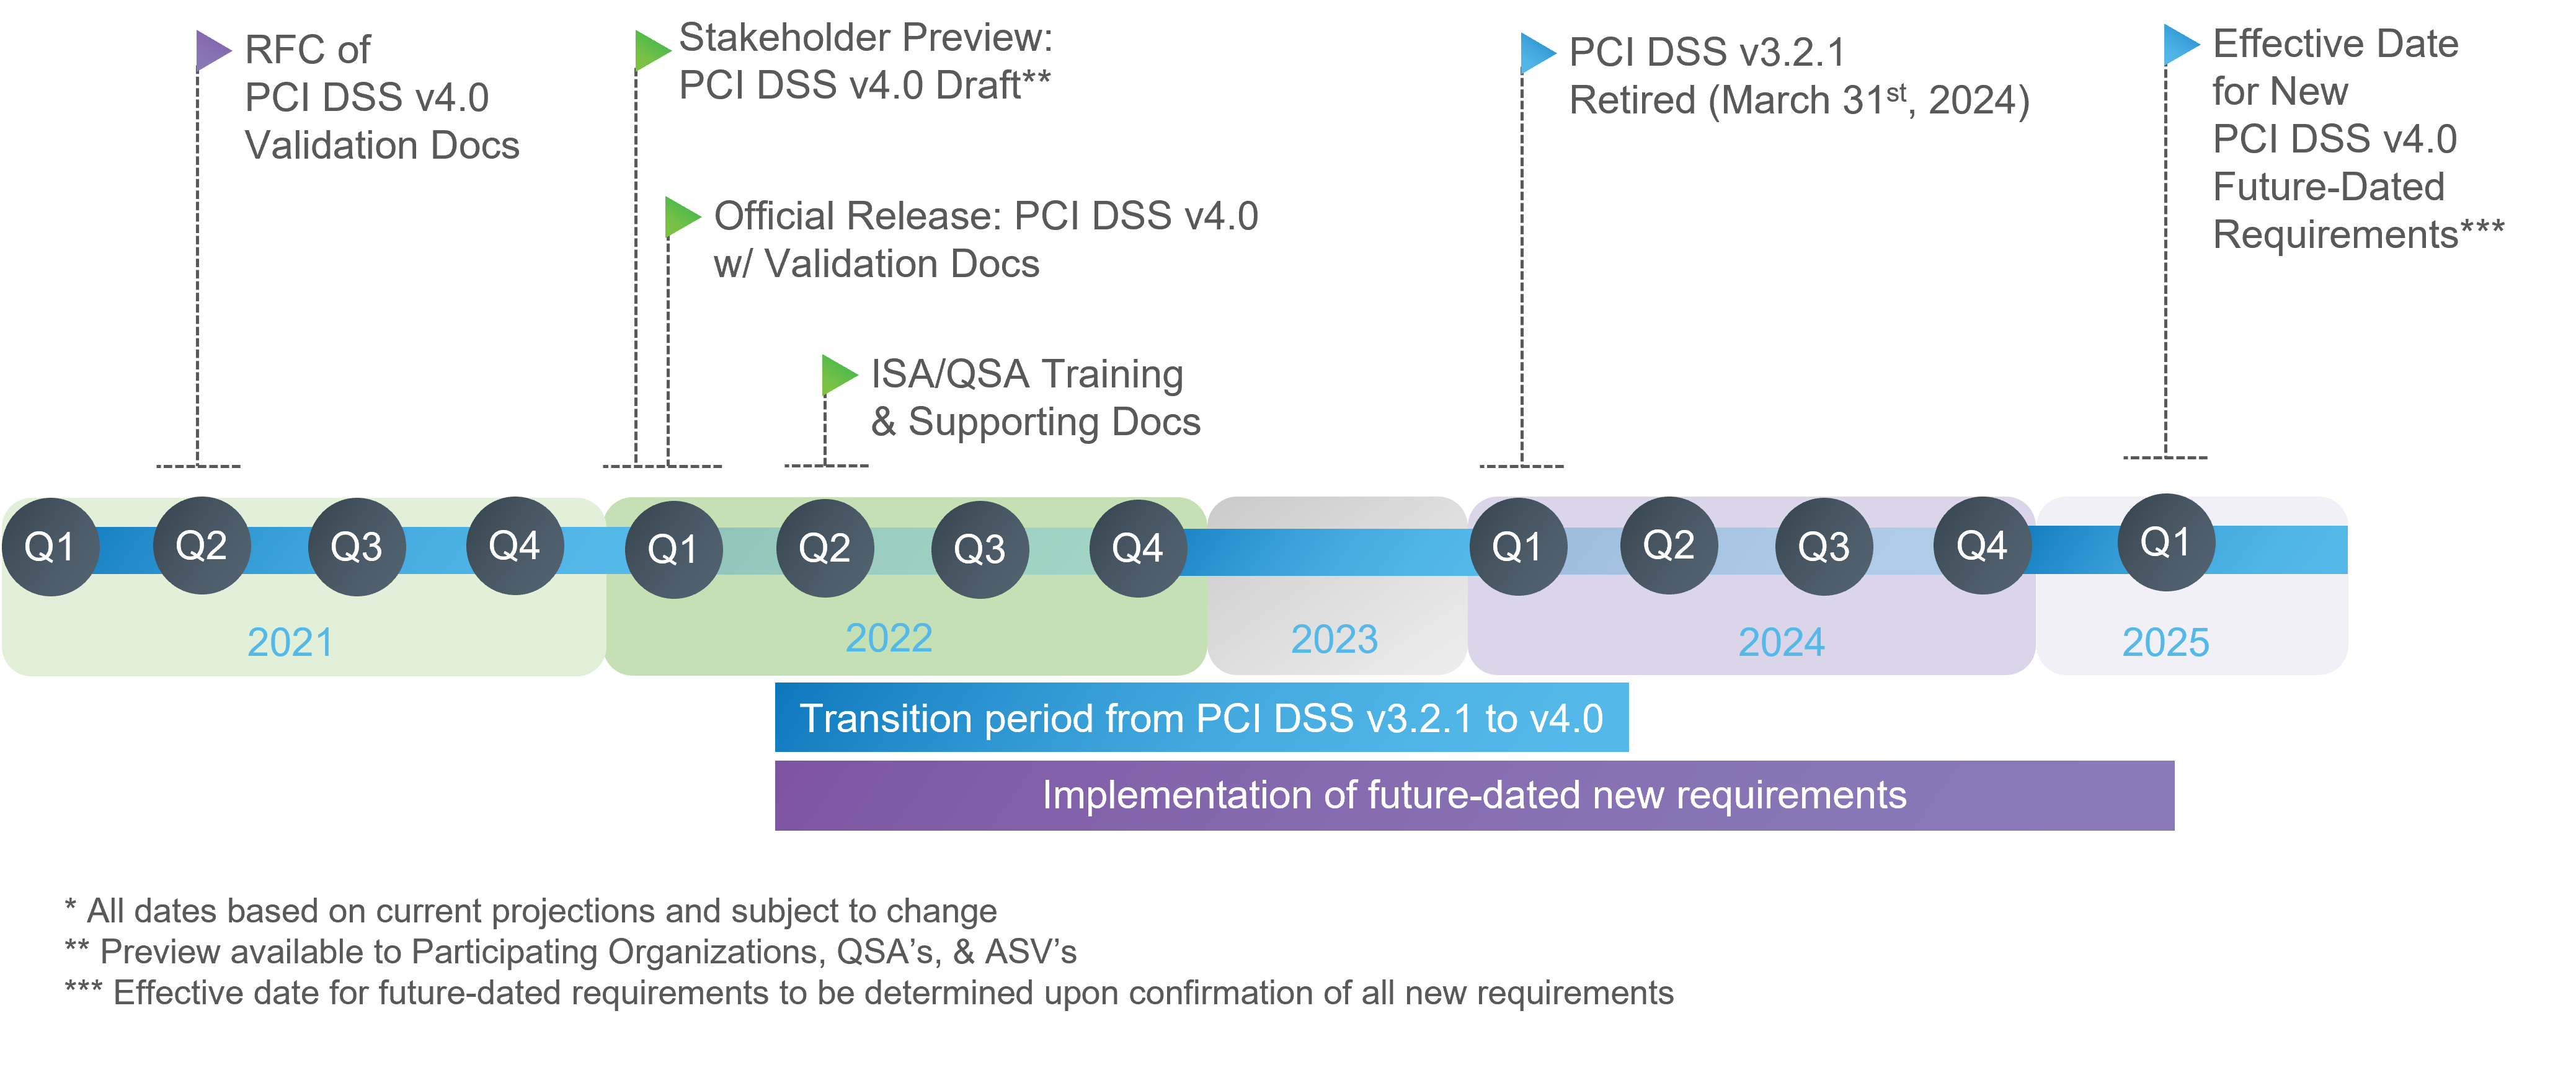 What’s New in PCI DSS v4.0 Timeline